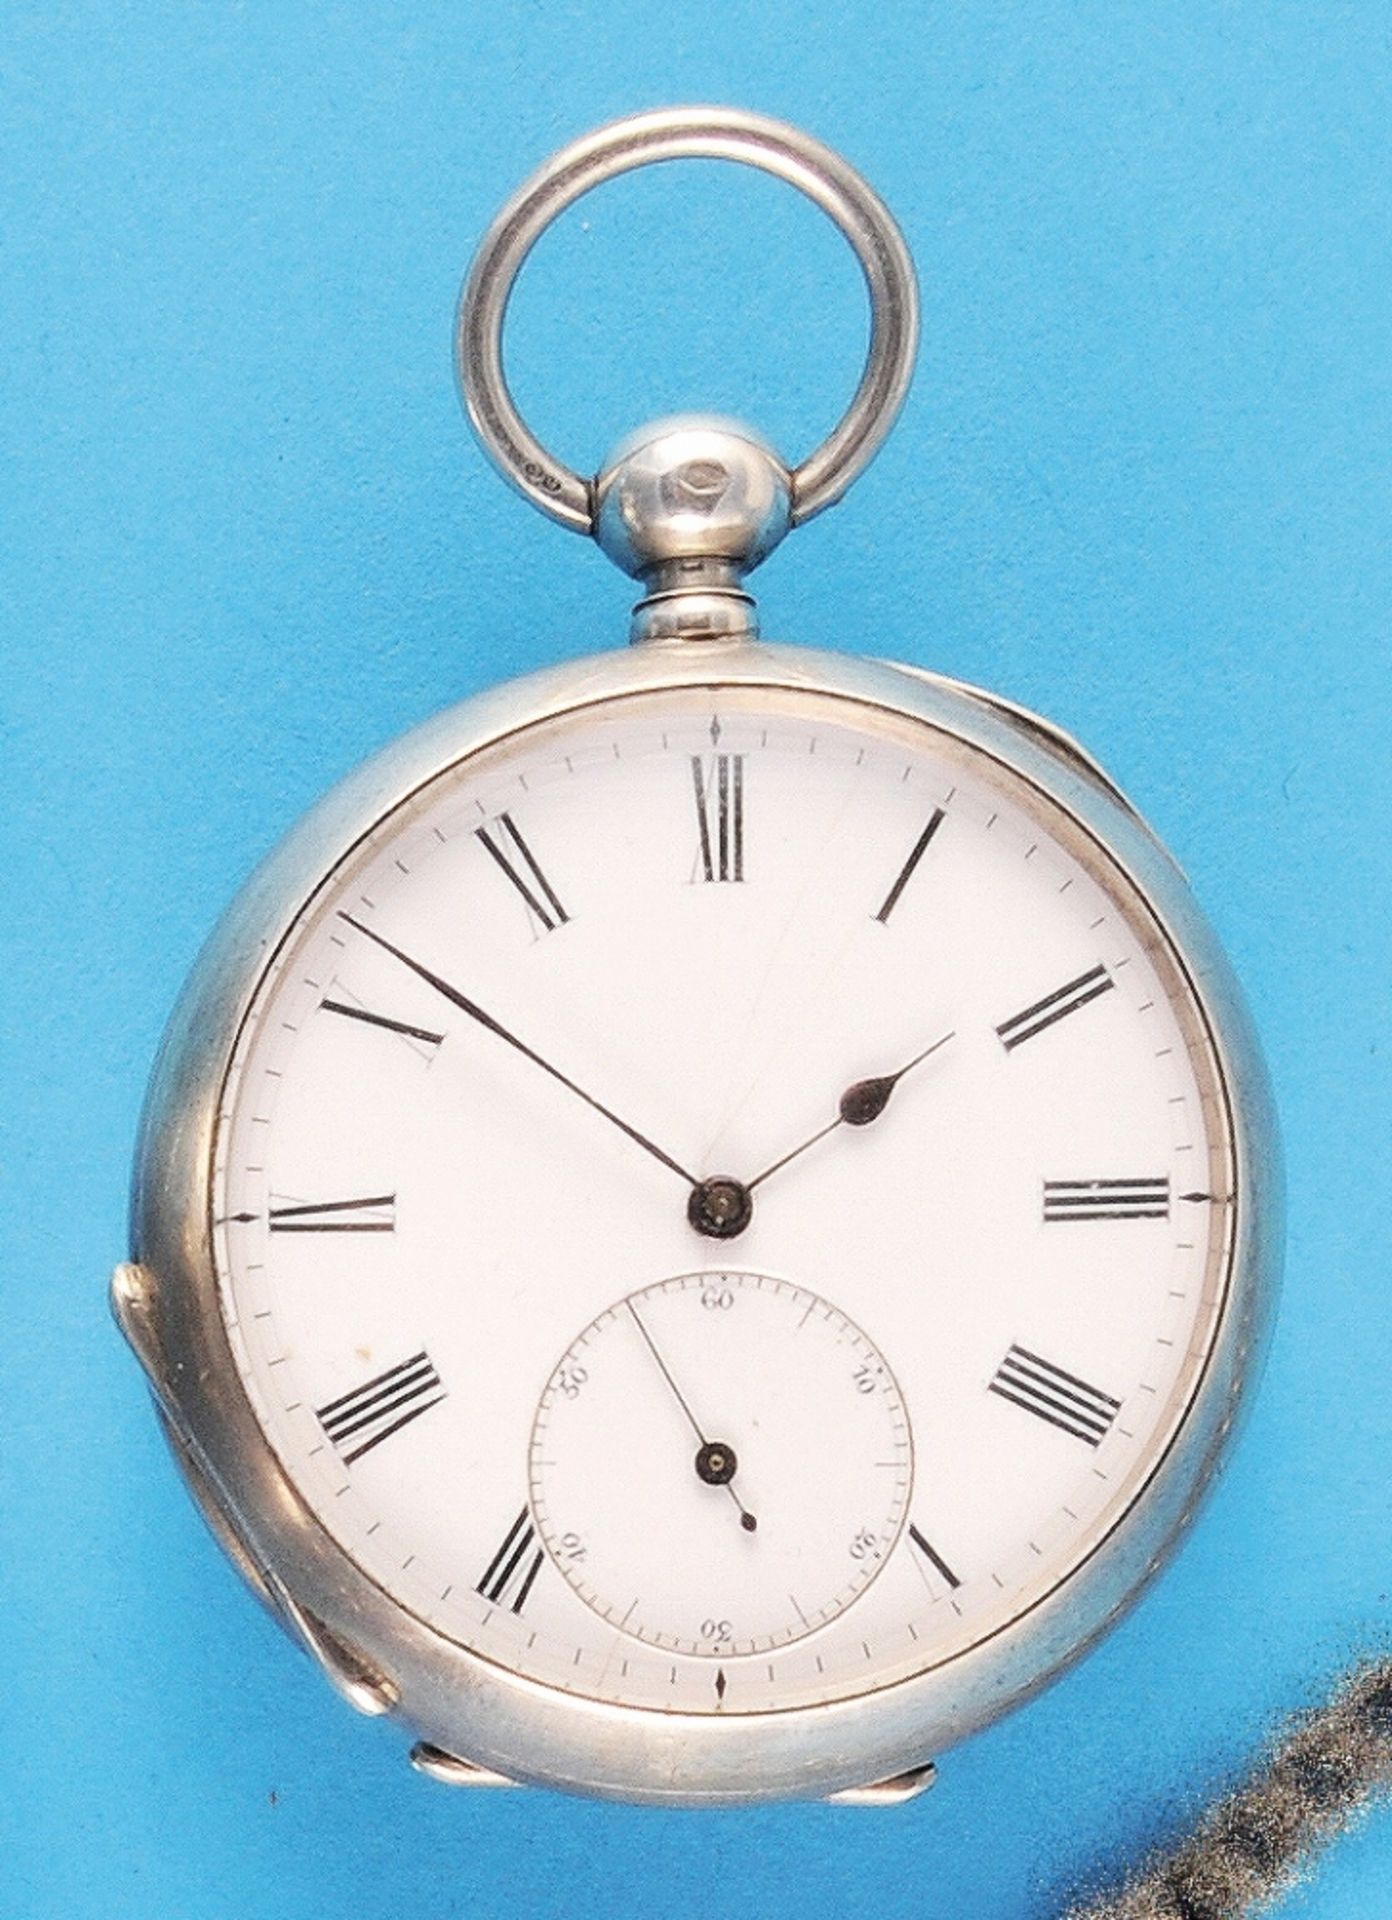 Rare German silver pocket watch with chronometer escapem, ent over fusee and chain - Image 2 of 2